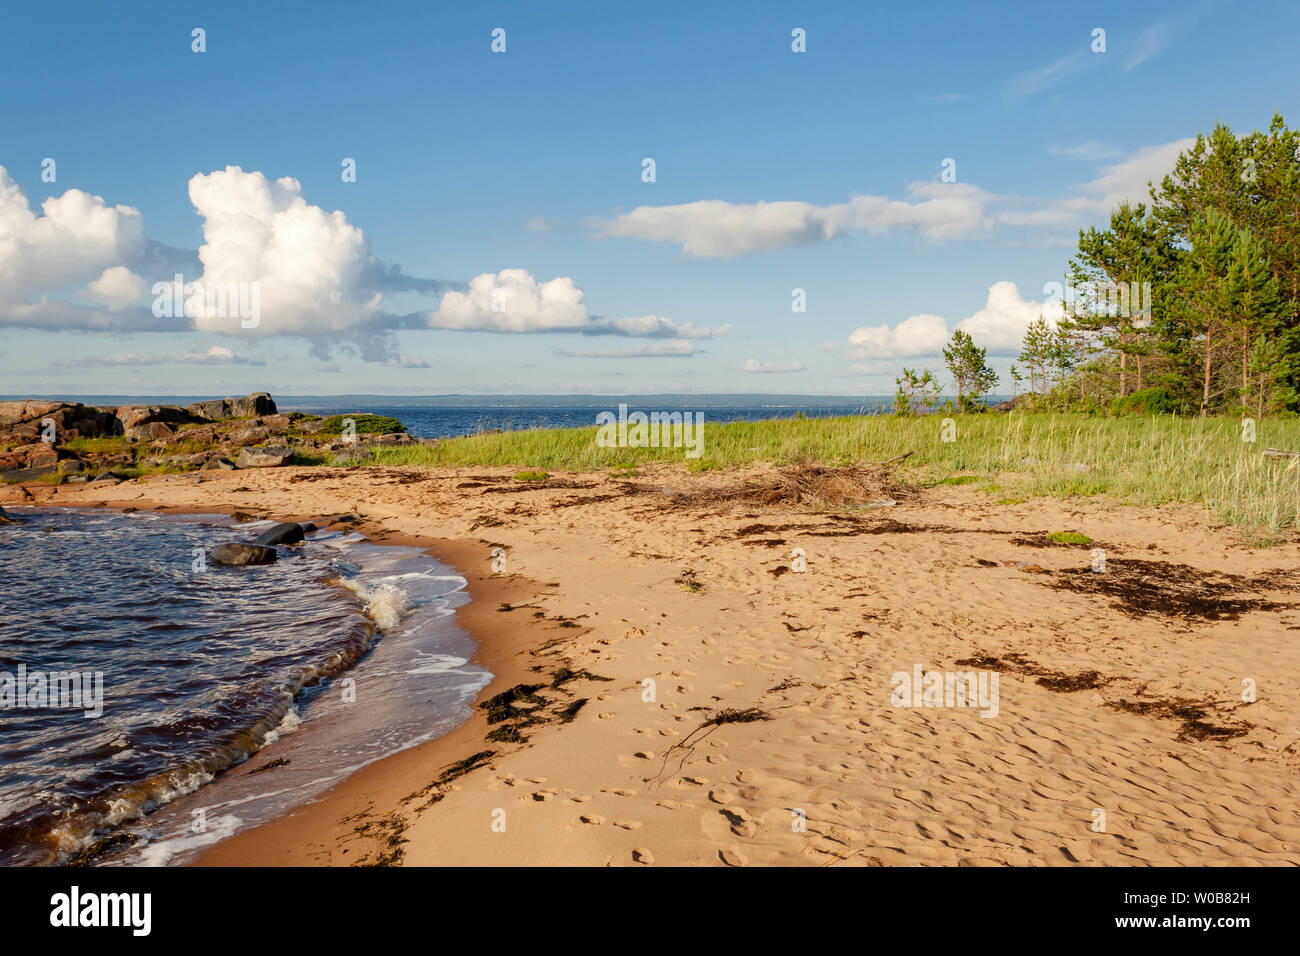 View of sea shore on Kiy island in the Onega Bay of the White Sea in Arkhangelsk region Russia. Concept of privacy desolation beautiful nature. Stock Photo